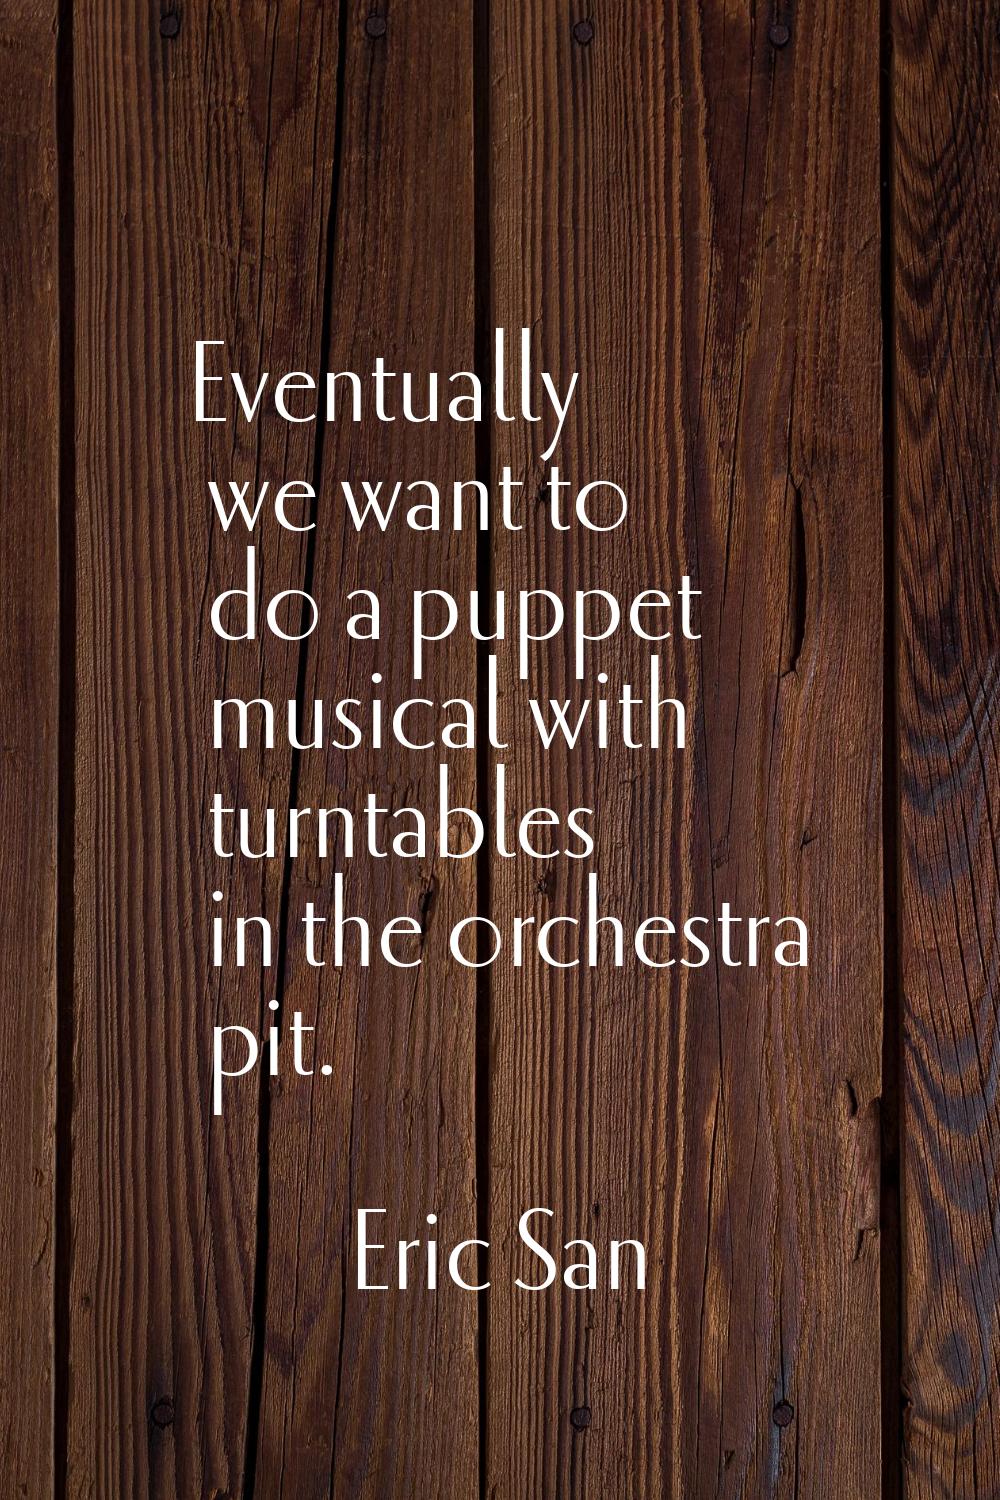 Eventually we want to do a puppet musical with turntables in the orchestra pit.